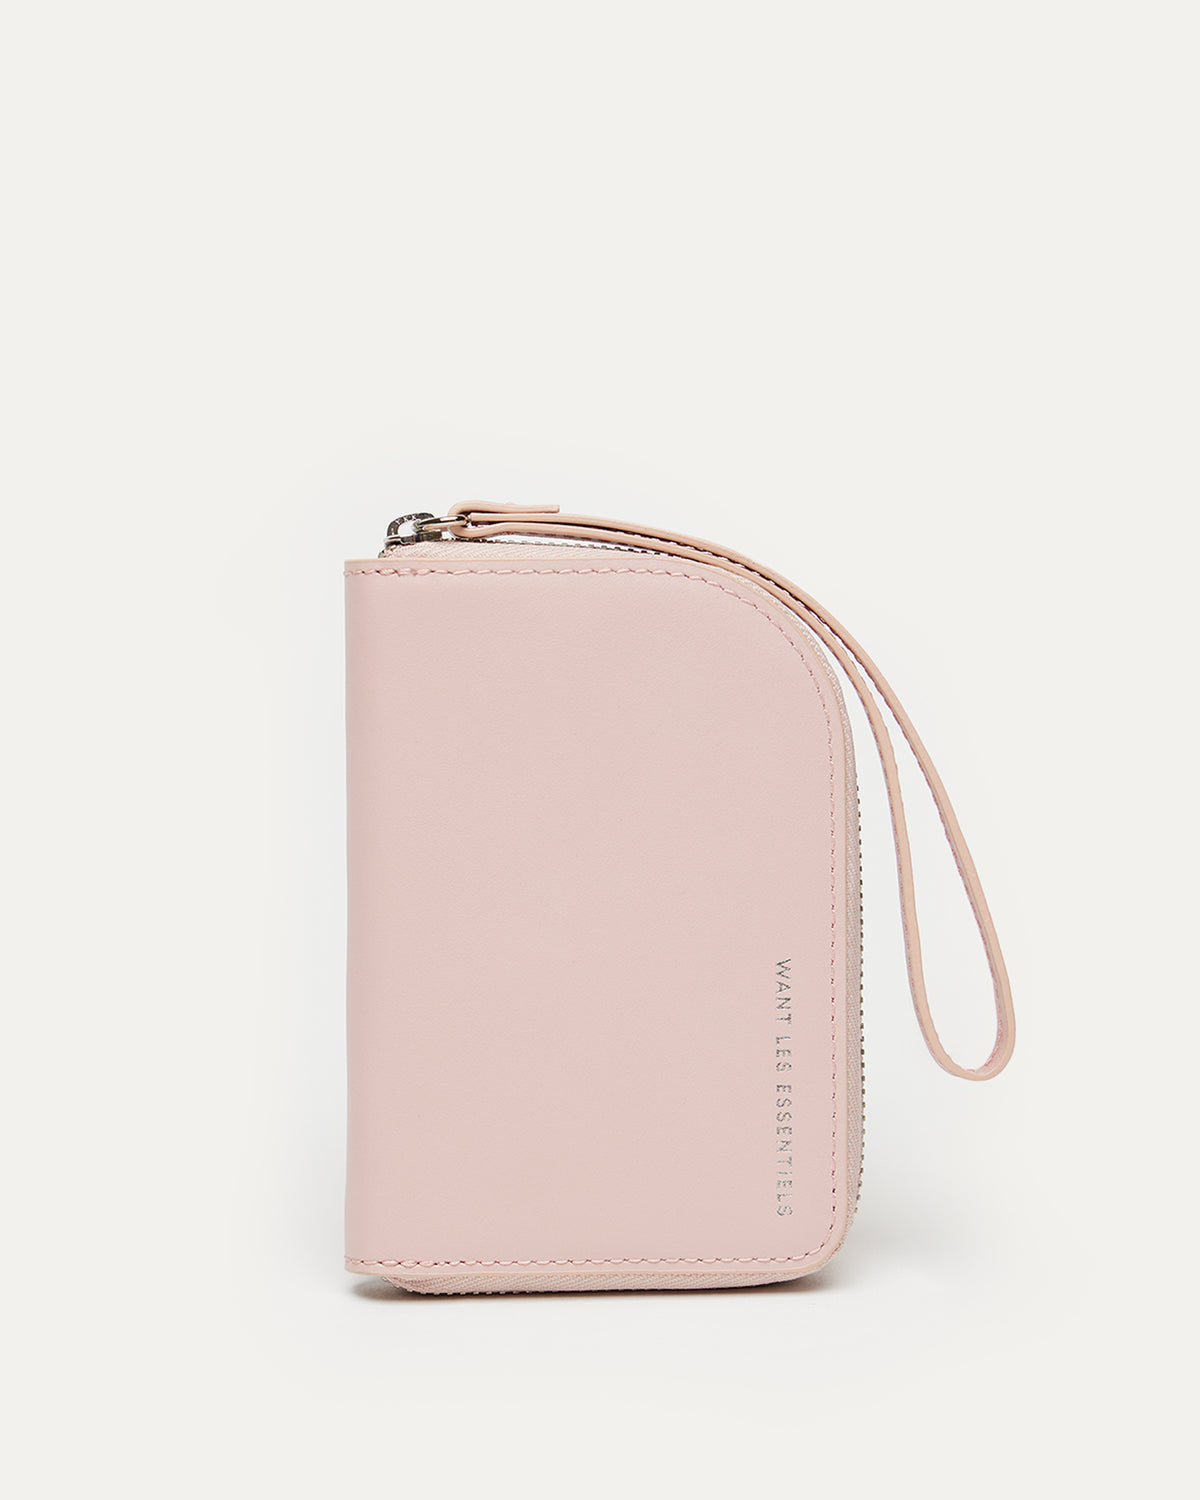 Arch Smooth Leather Zip Wallet